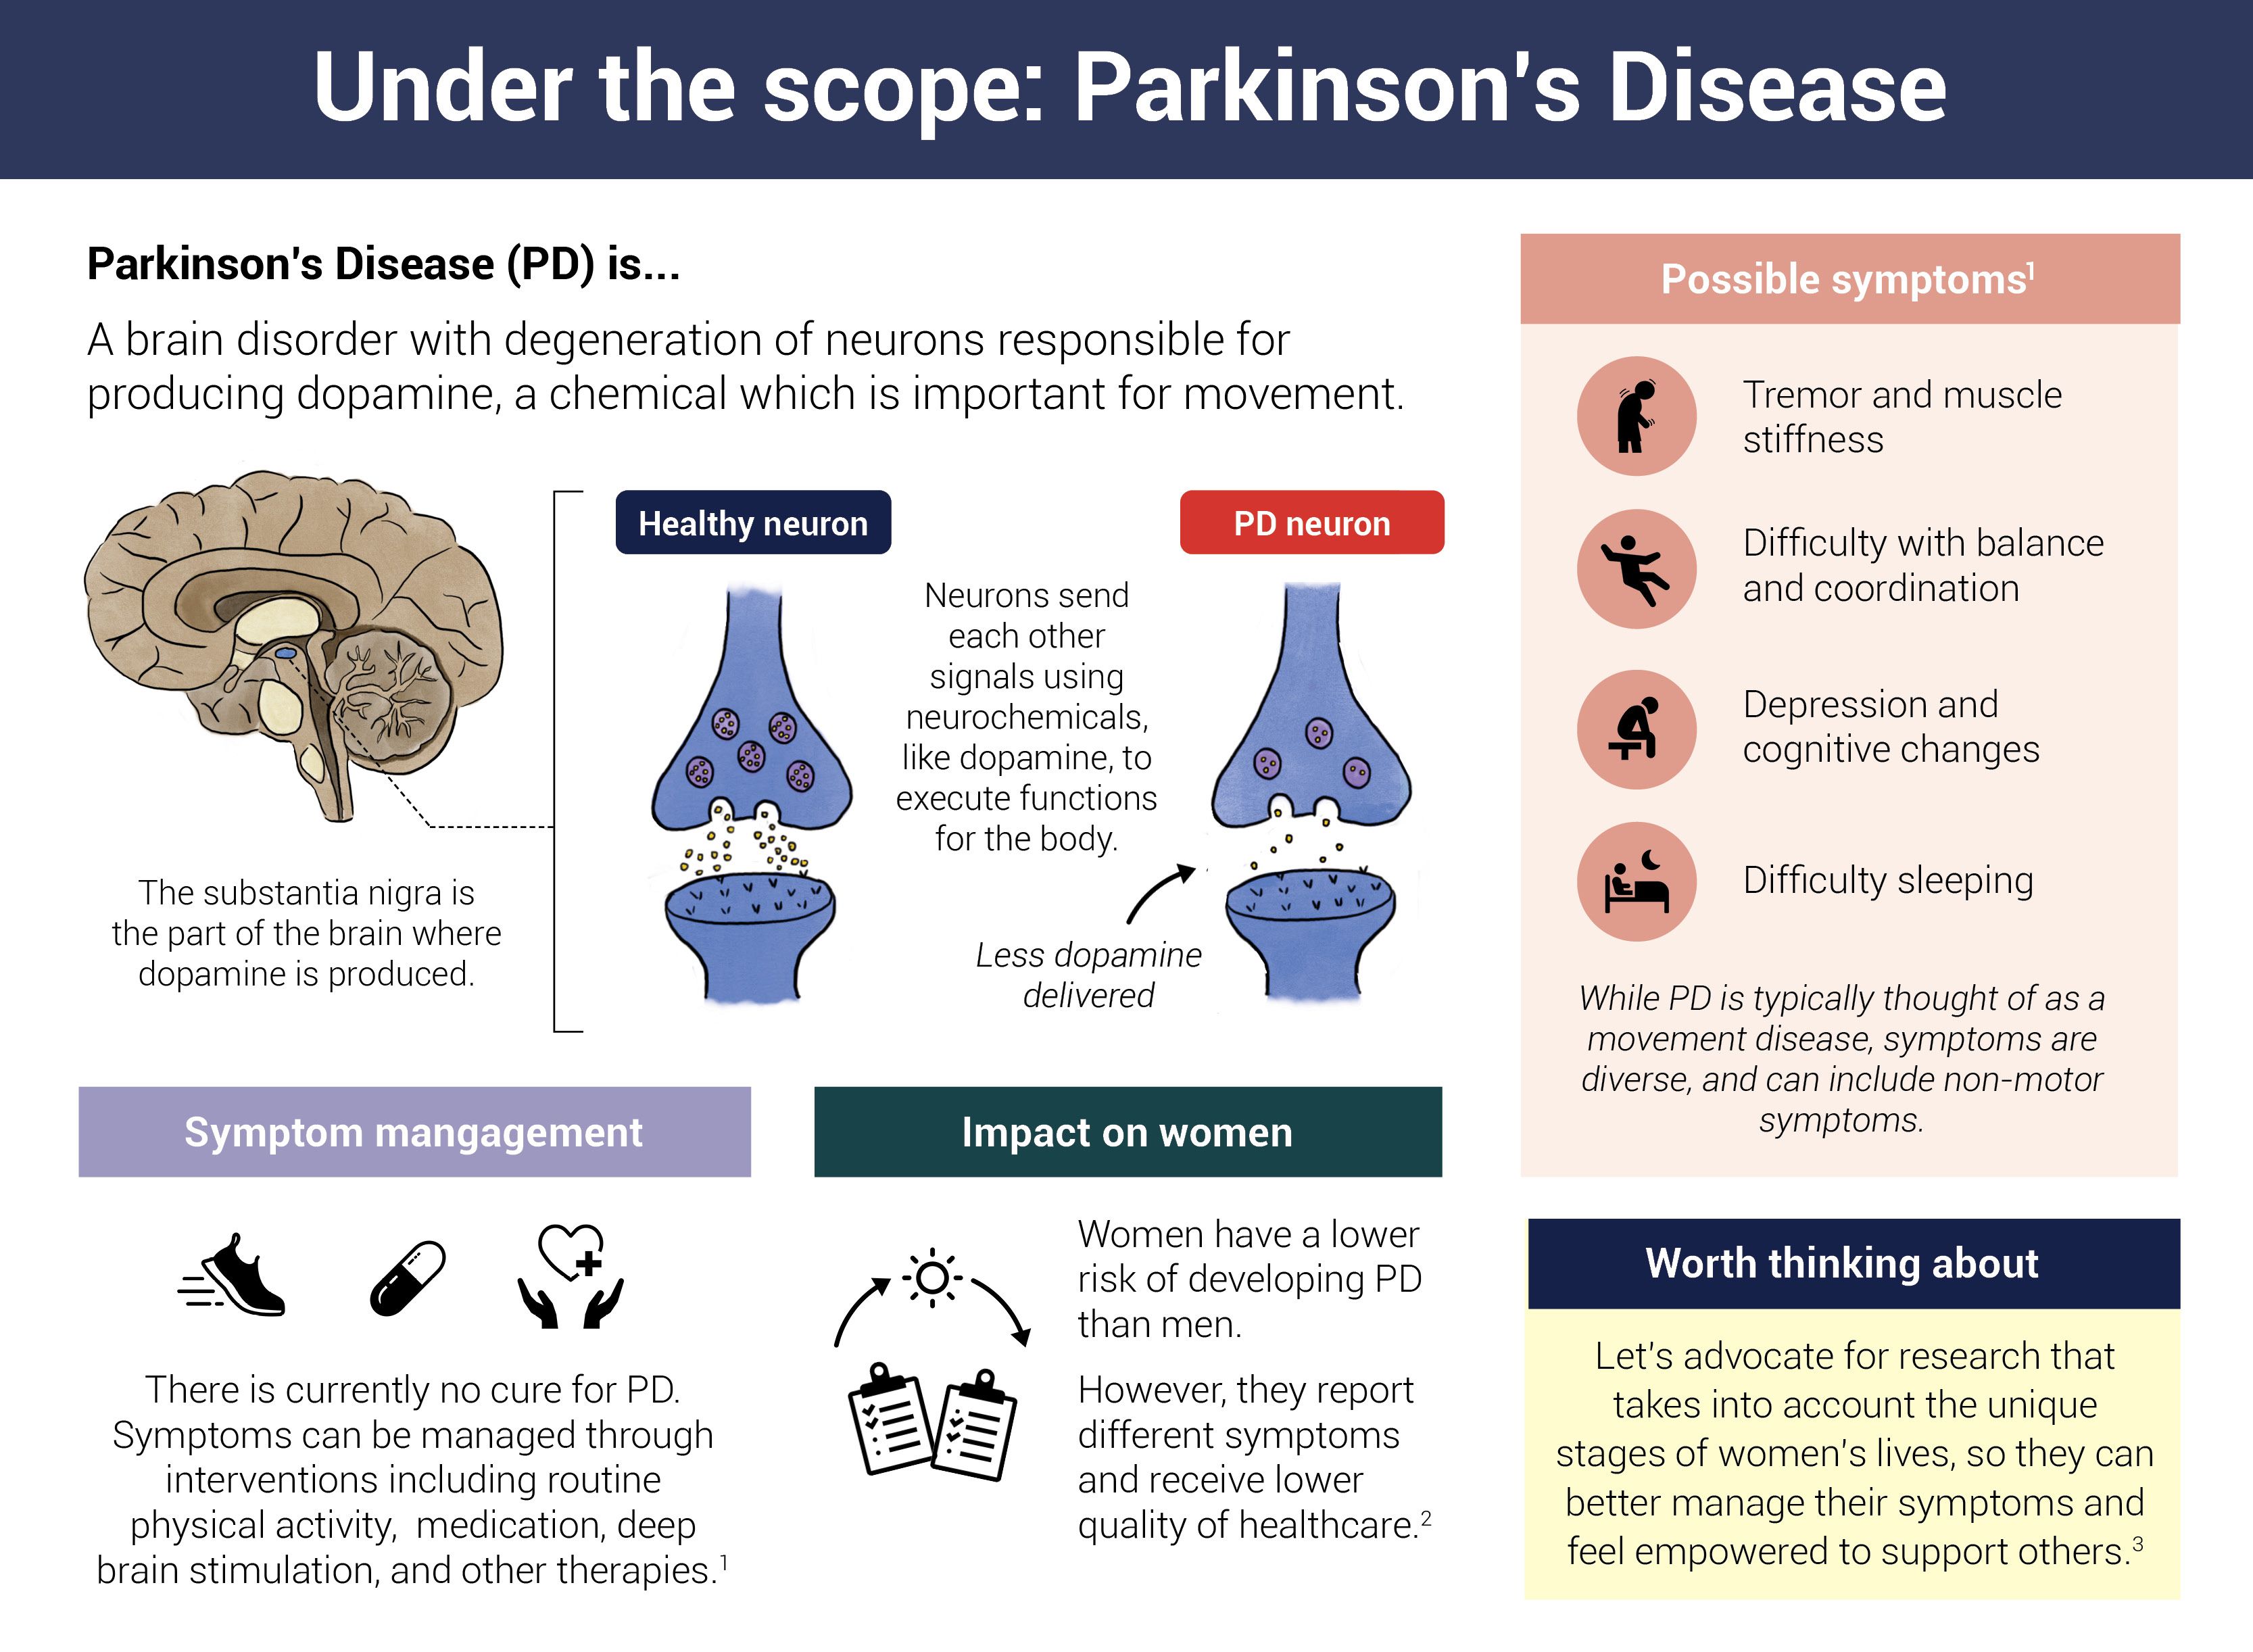 Infographic about the biology of Parkinson's disease